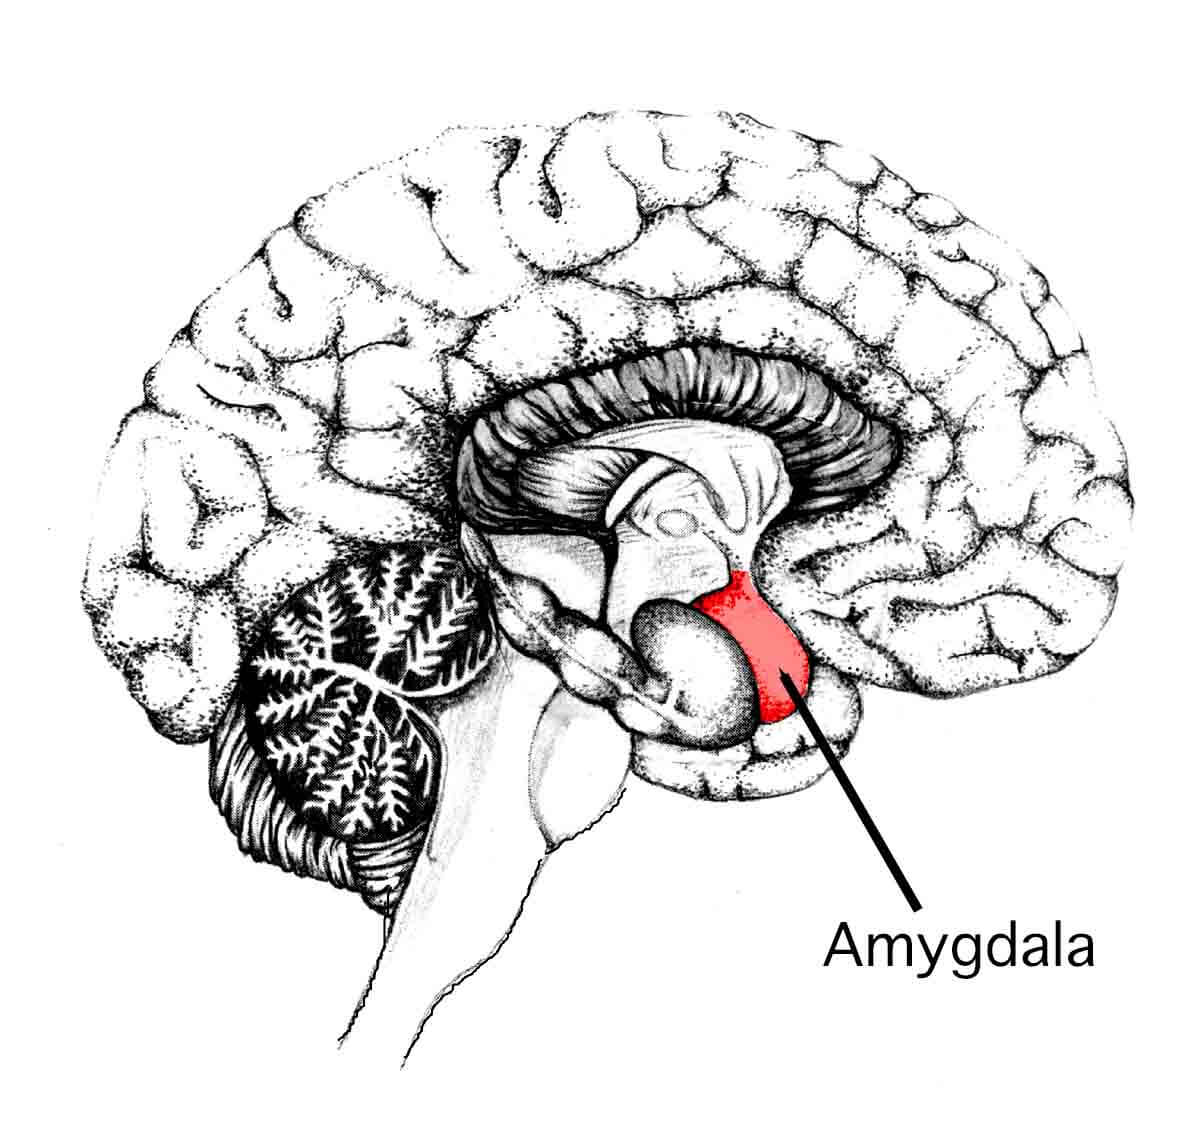 The amygdala, initiator of the fight-or-flight response in the human brain